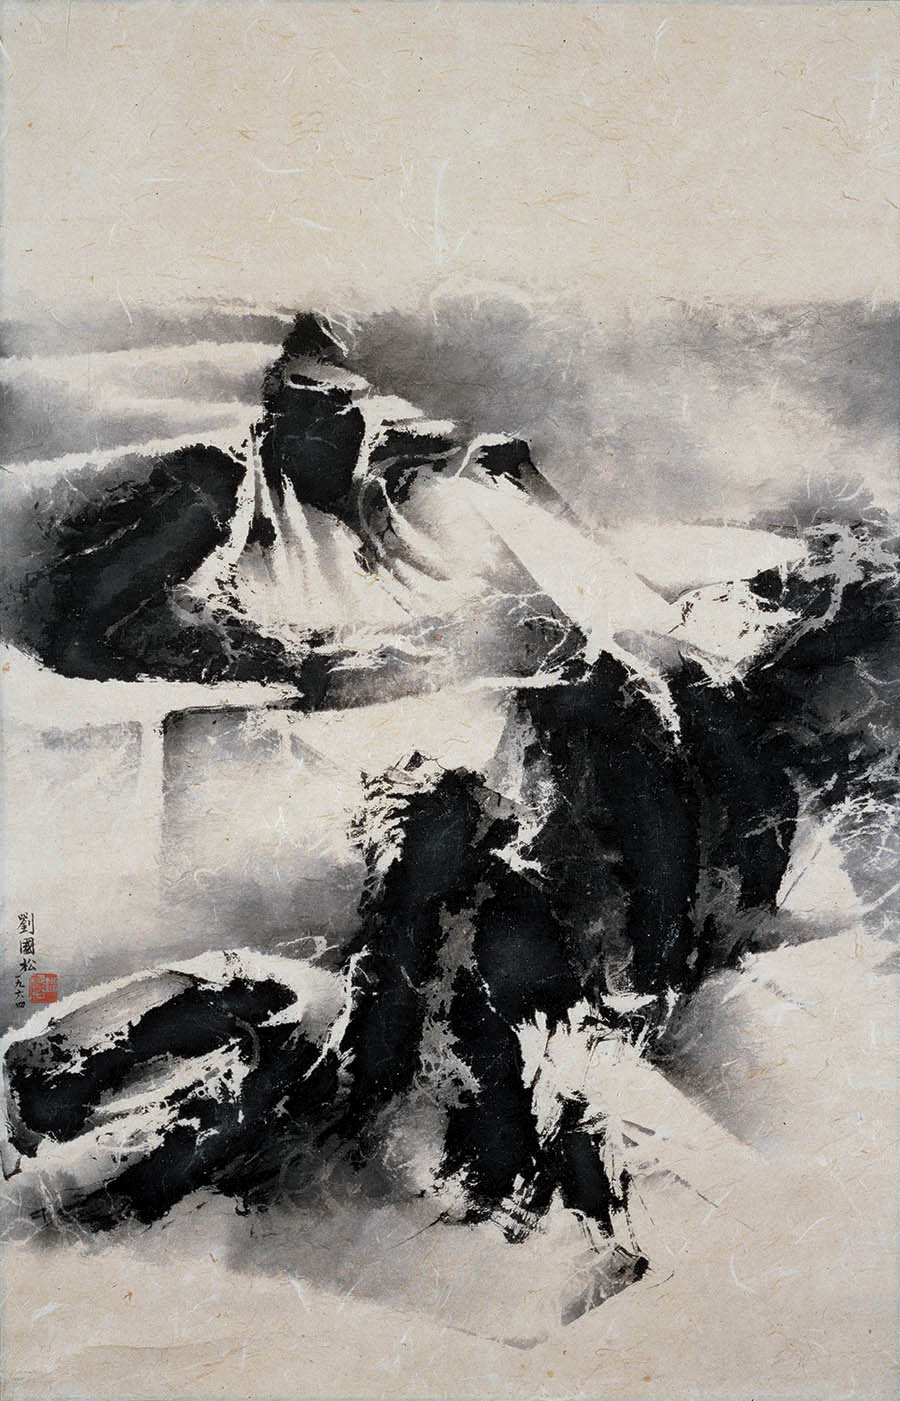 Liu Kuo-sung, <i>Wintry Mountains Covered with Snow,</i> 1964